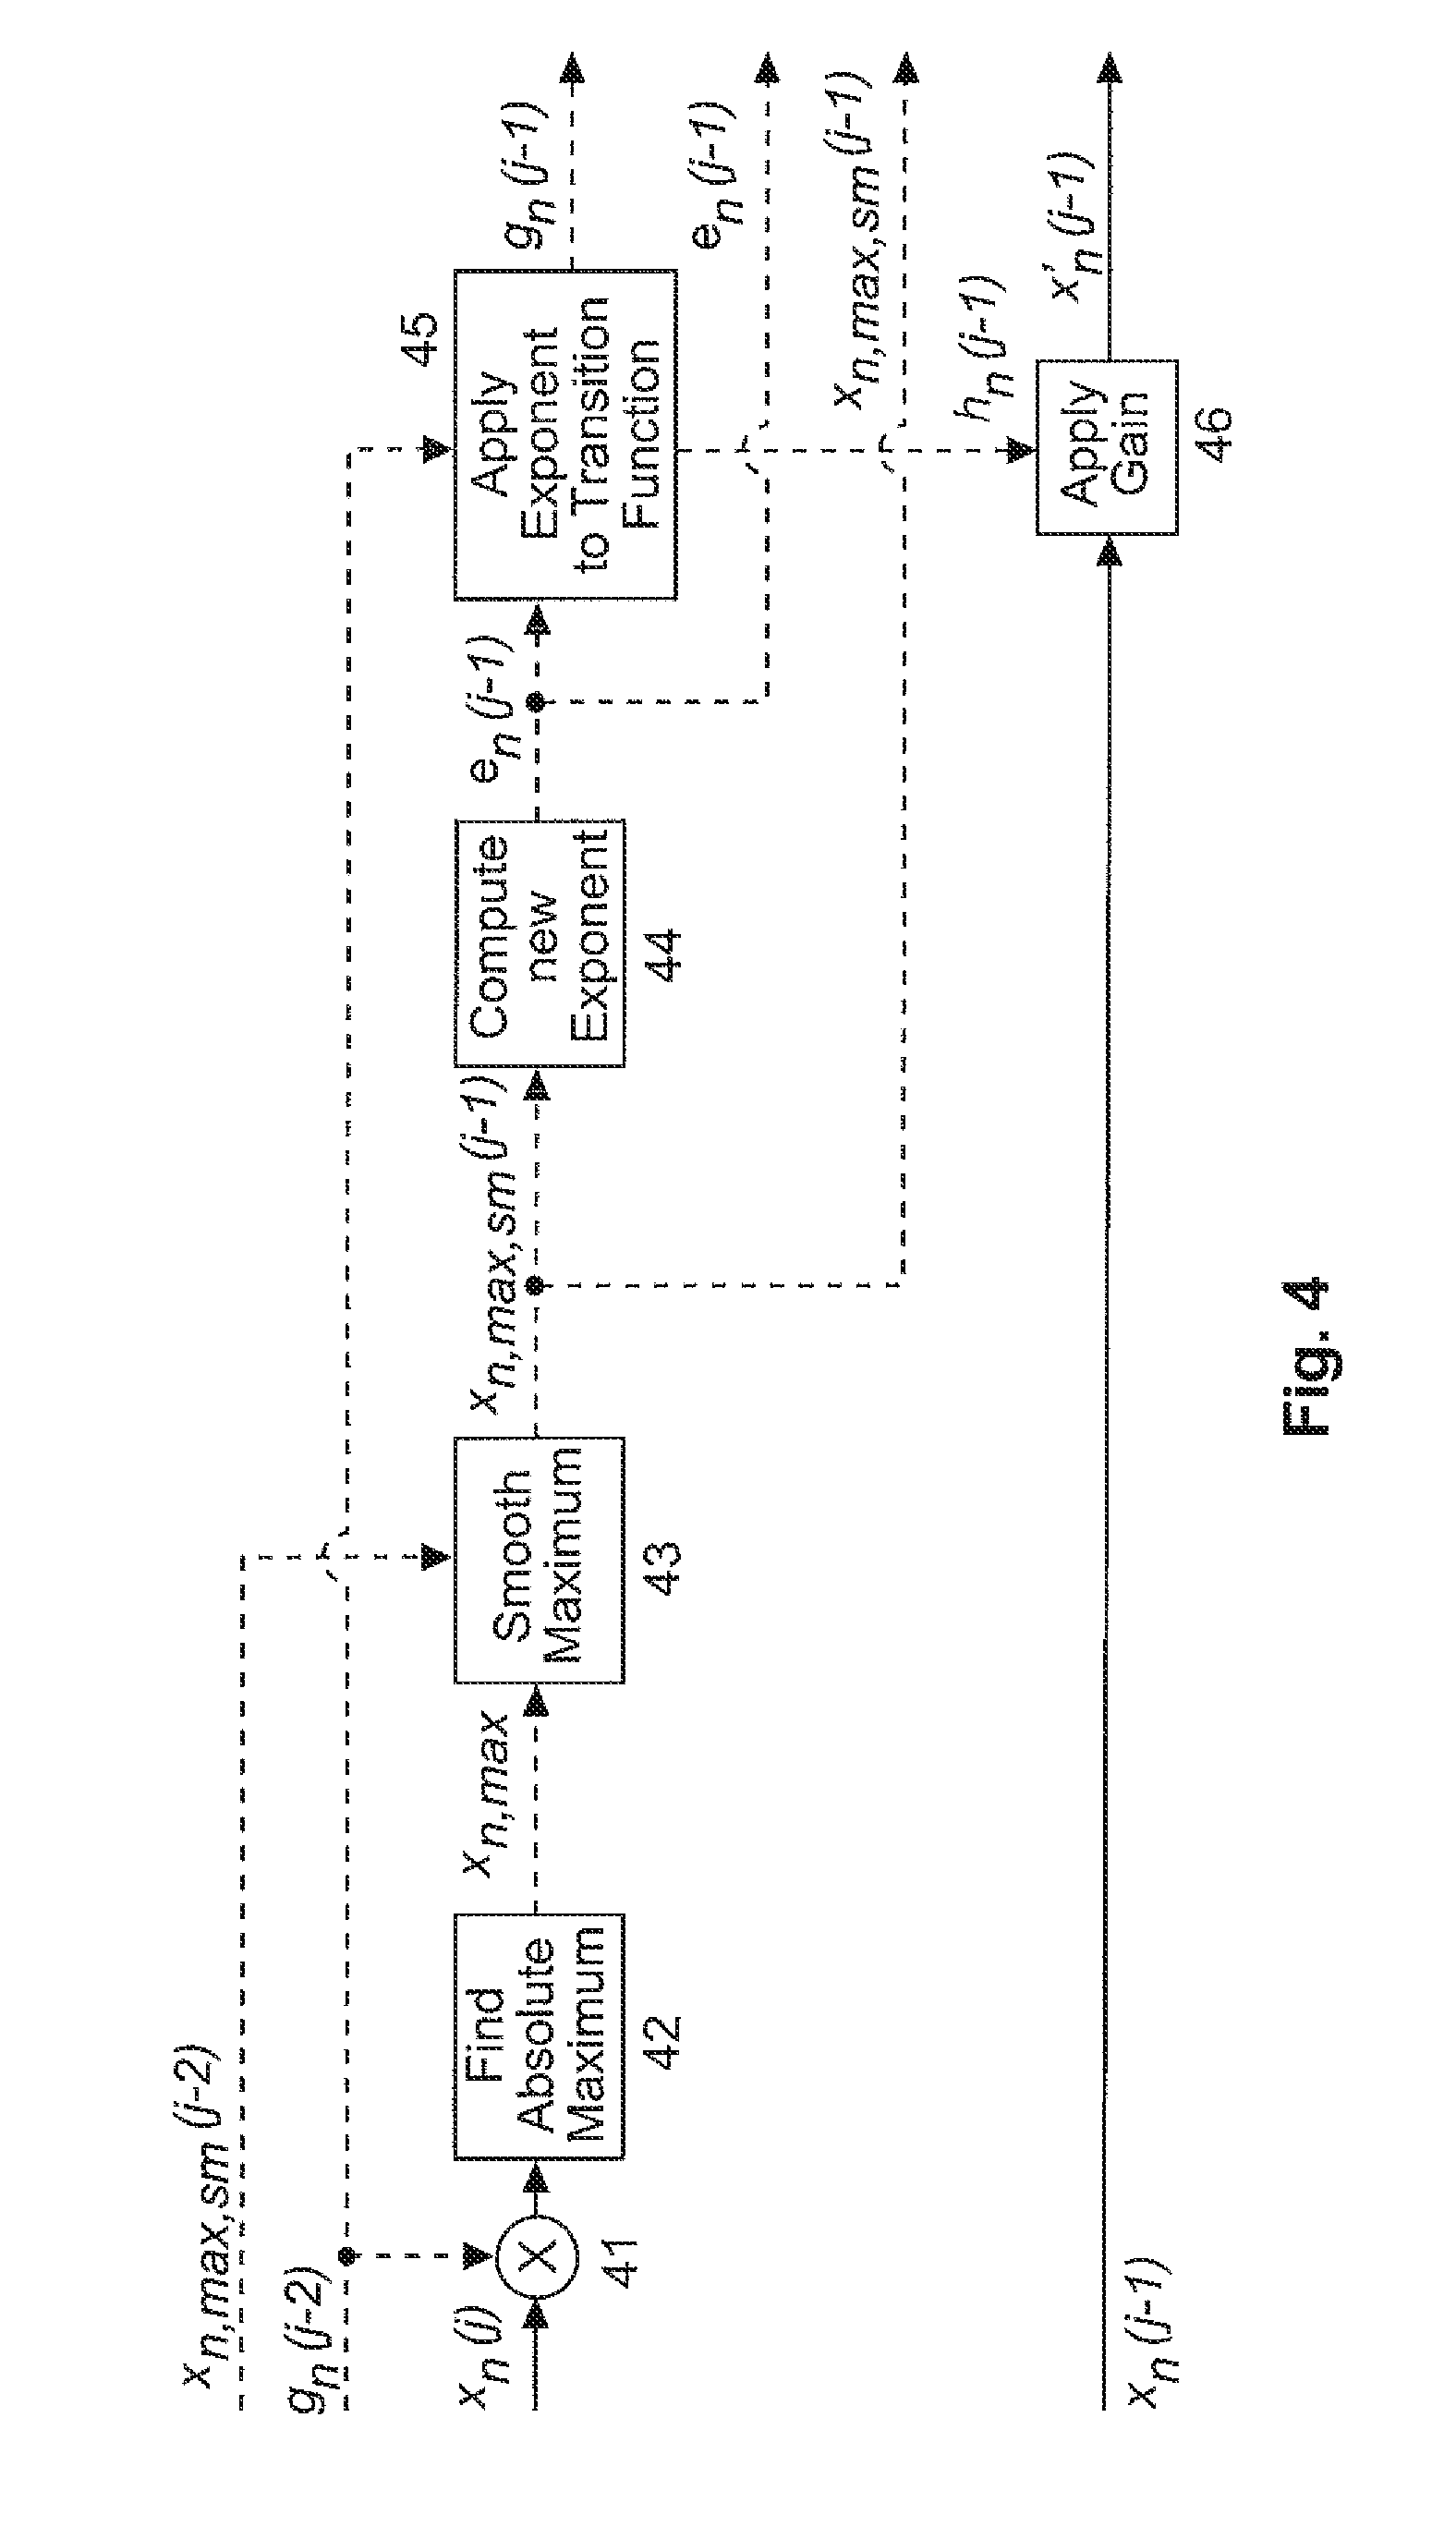 Method and apparatus for generating from a coefficient domain representation of hoa signals a mixed spatial/coefficient domain representation of said hoa signals